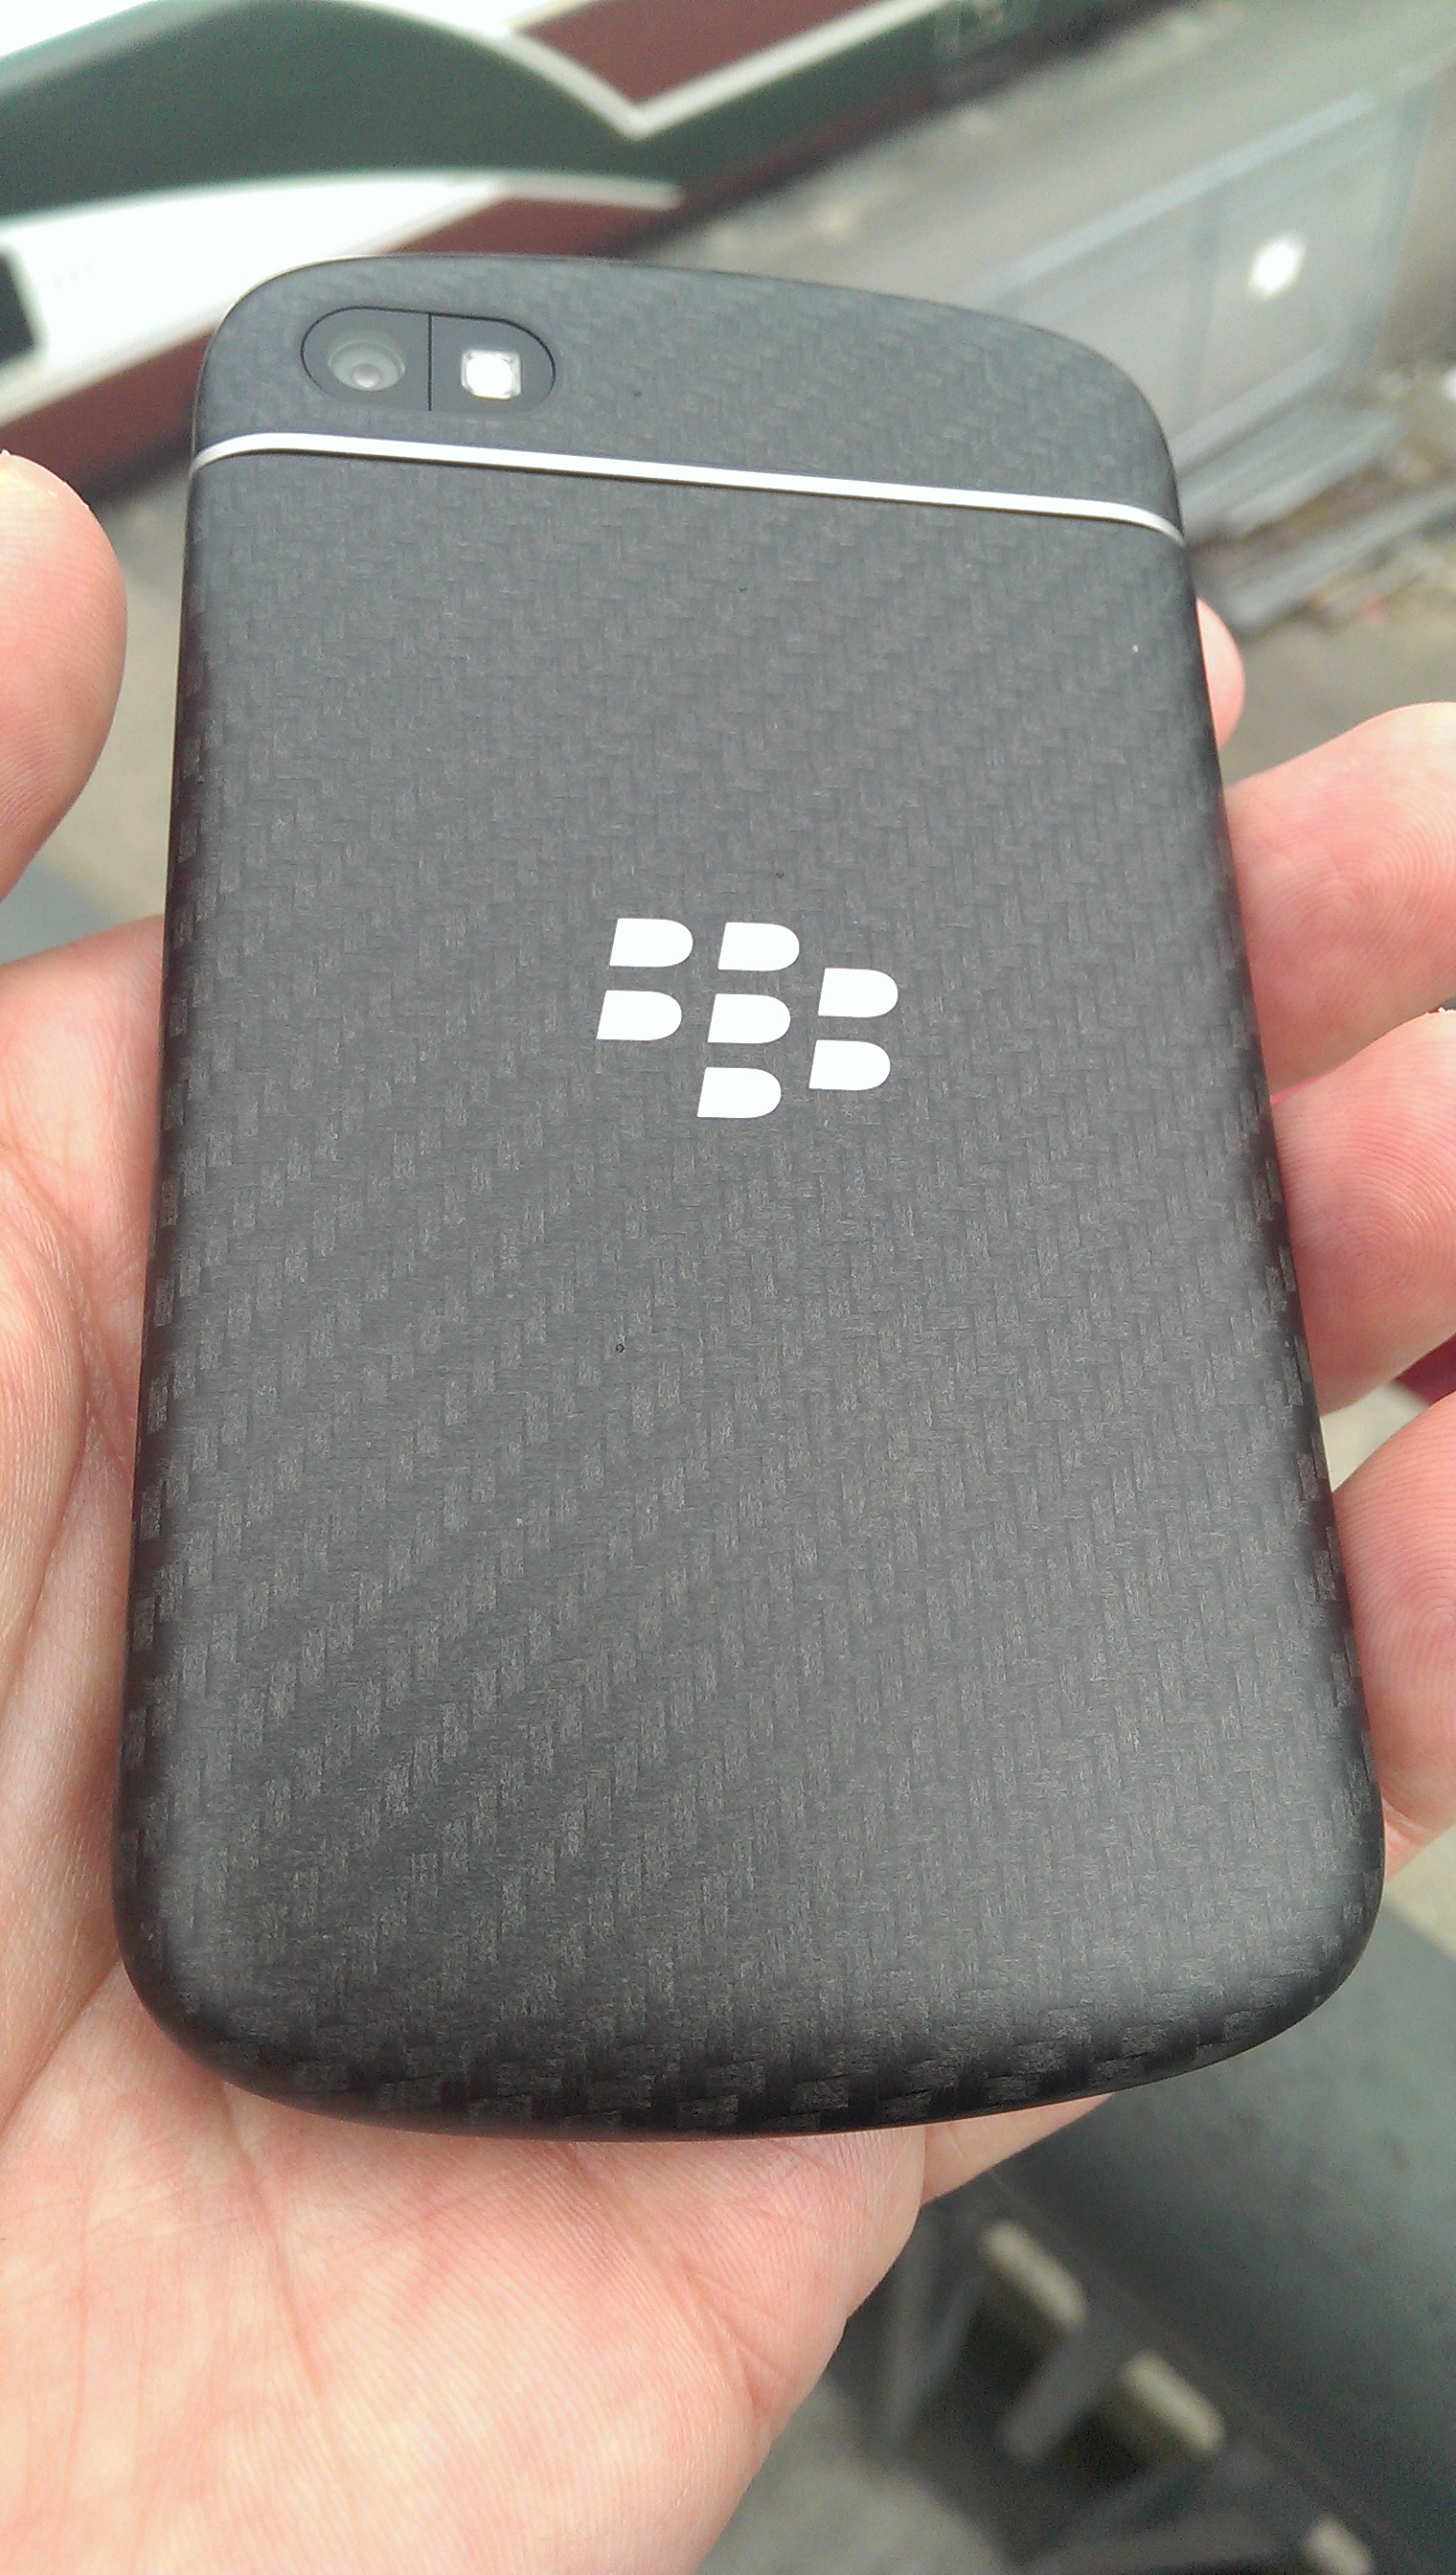 BlackBerry Q10: Hardware QWERTY and long battery have a place in ZDNET